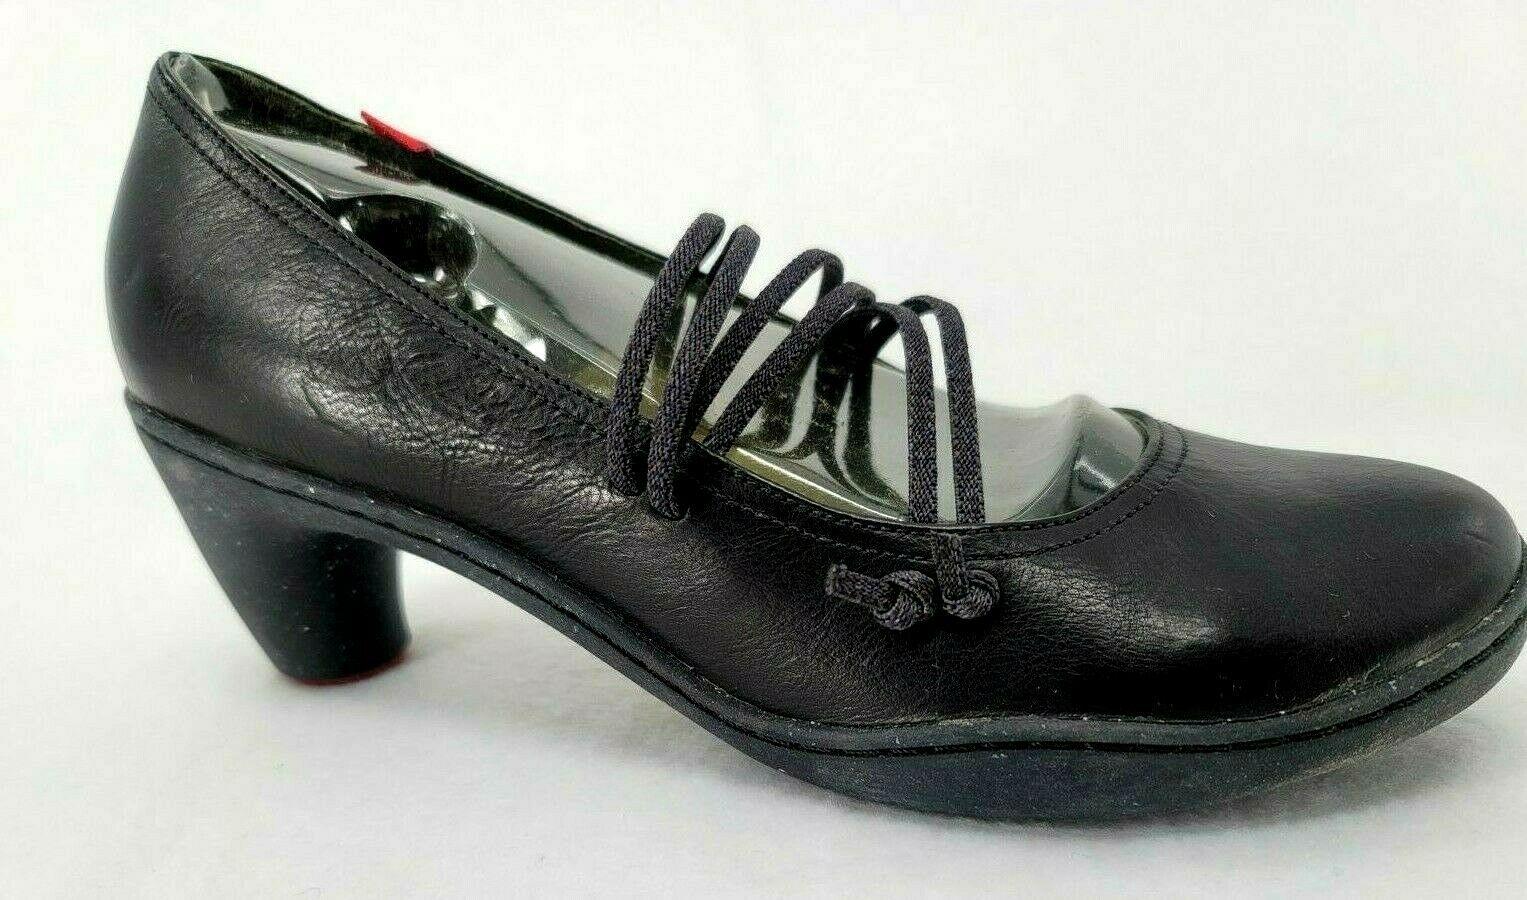 Camper Peu Nara Leather Women's Black With Straps Mary Jane Heels EU 40 - SVNYFancy